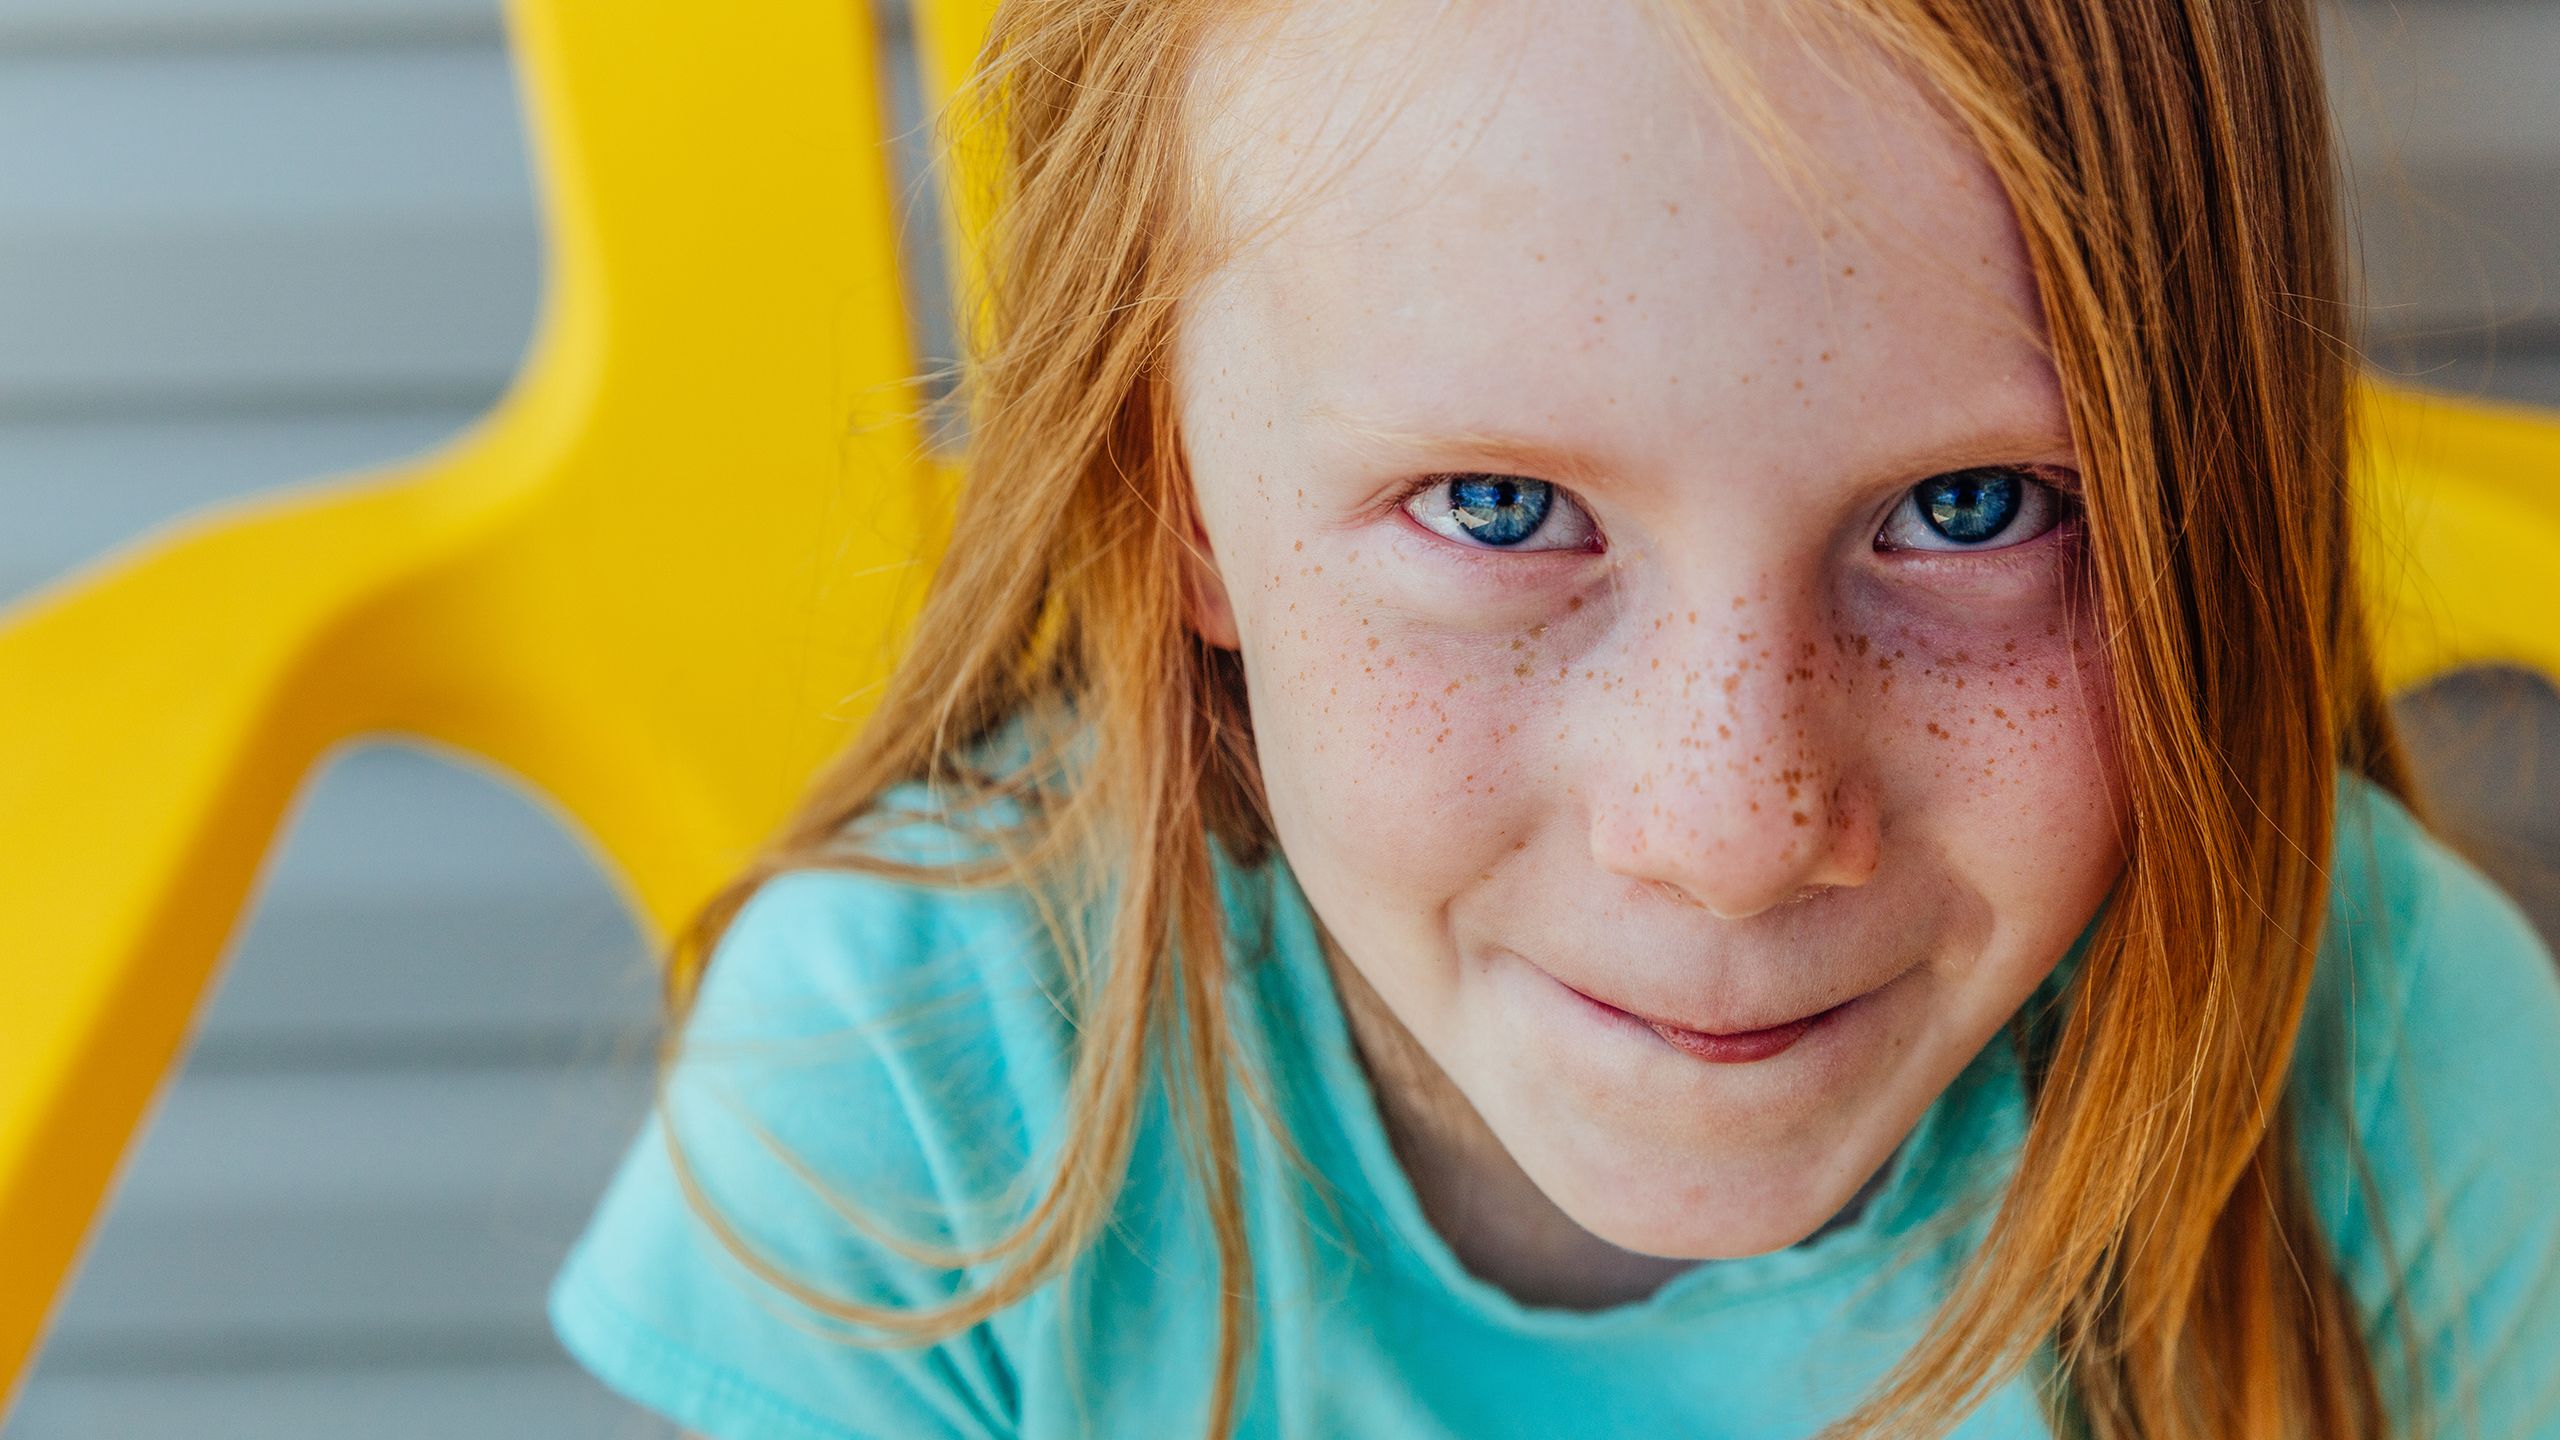 Portrait of Jazmine, a young girl with bright red hair and freckles, in a teal t-shirt sitting in a bright yellow chair.